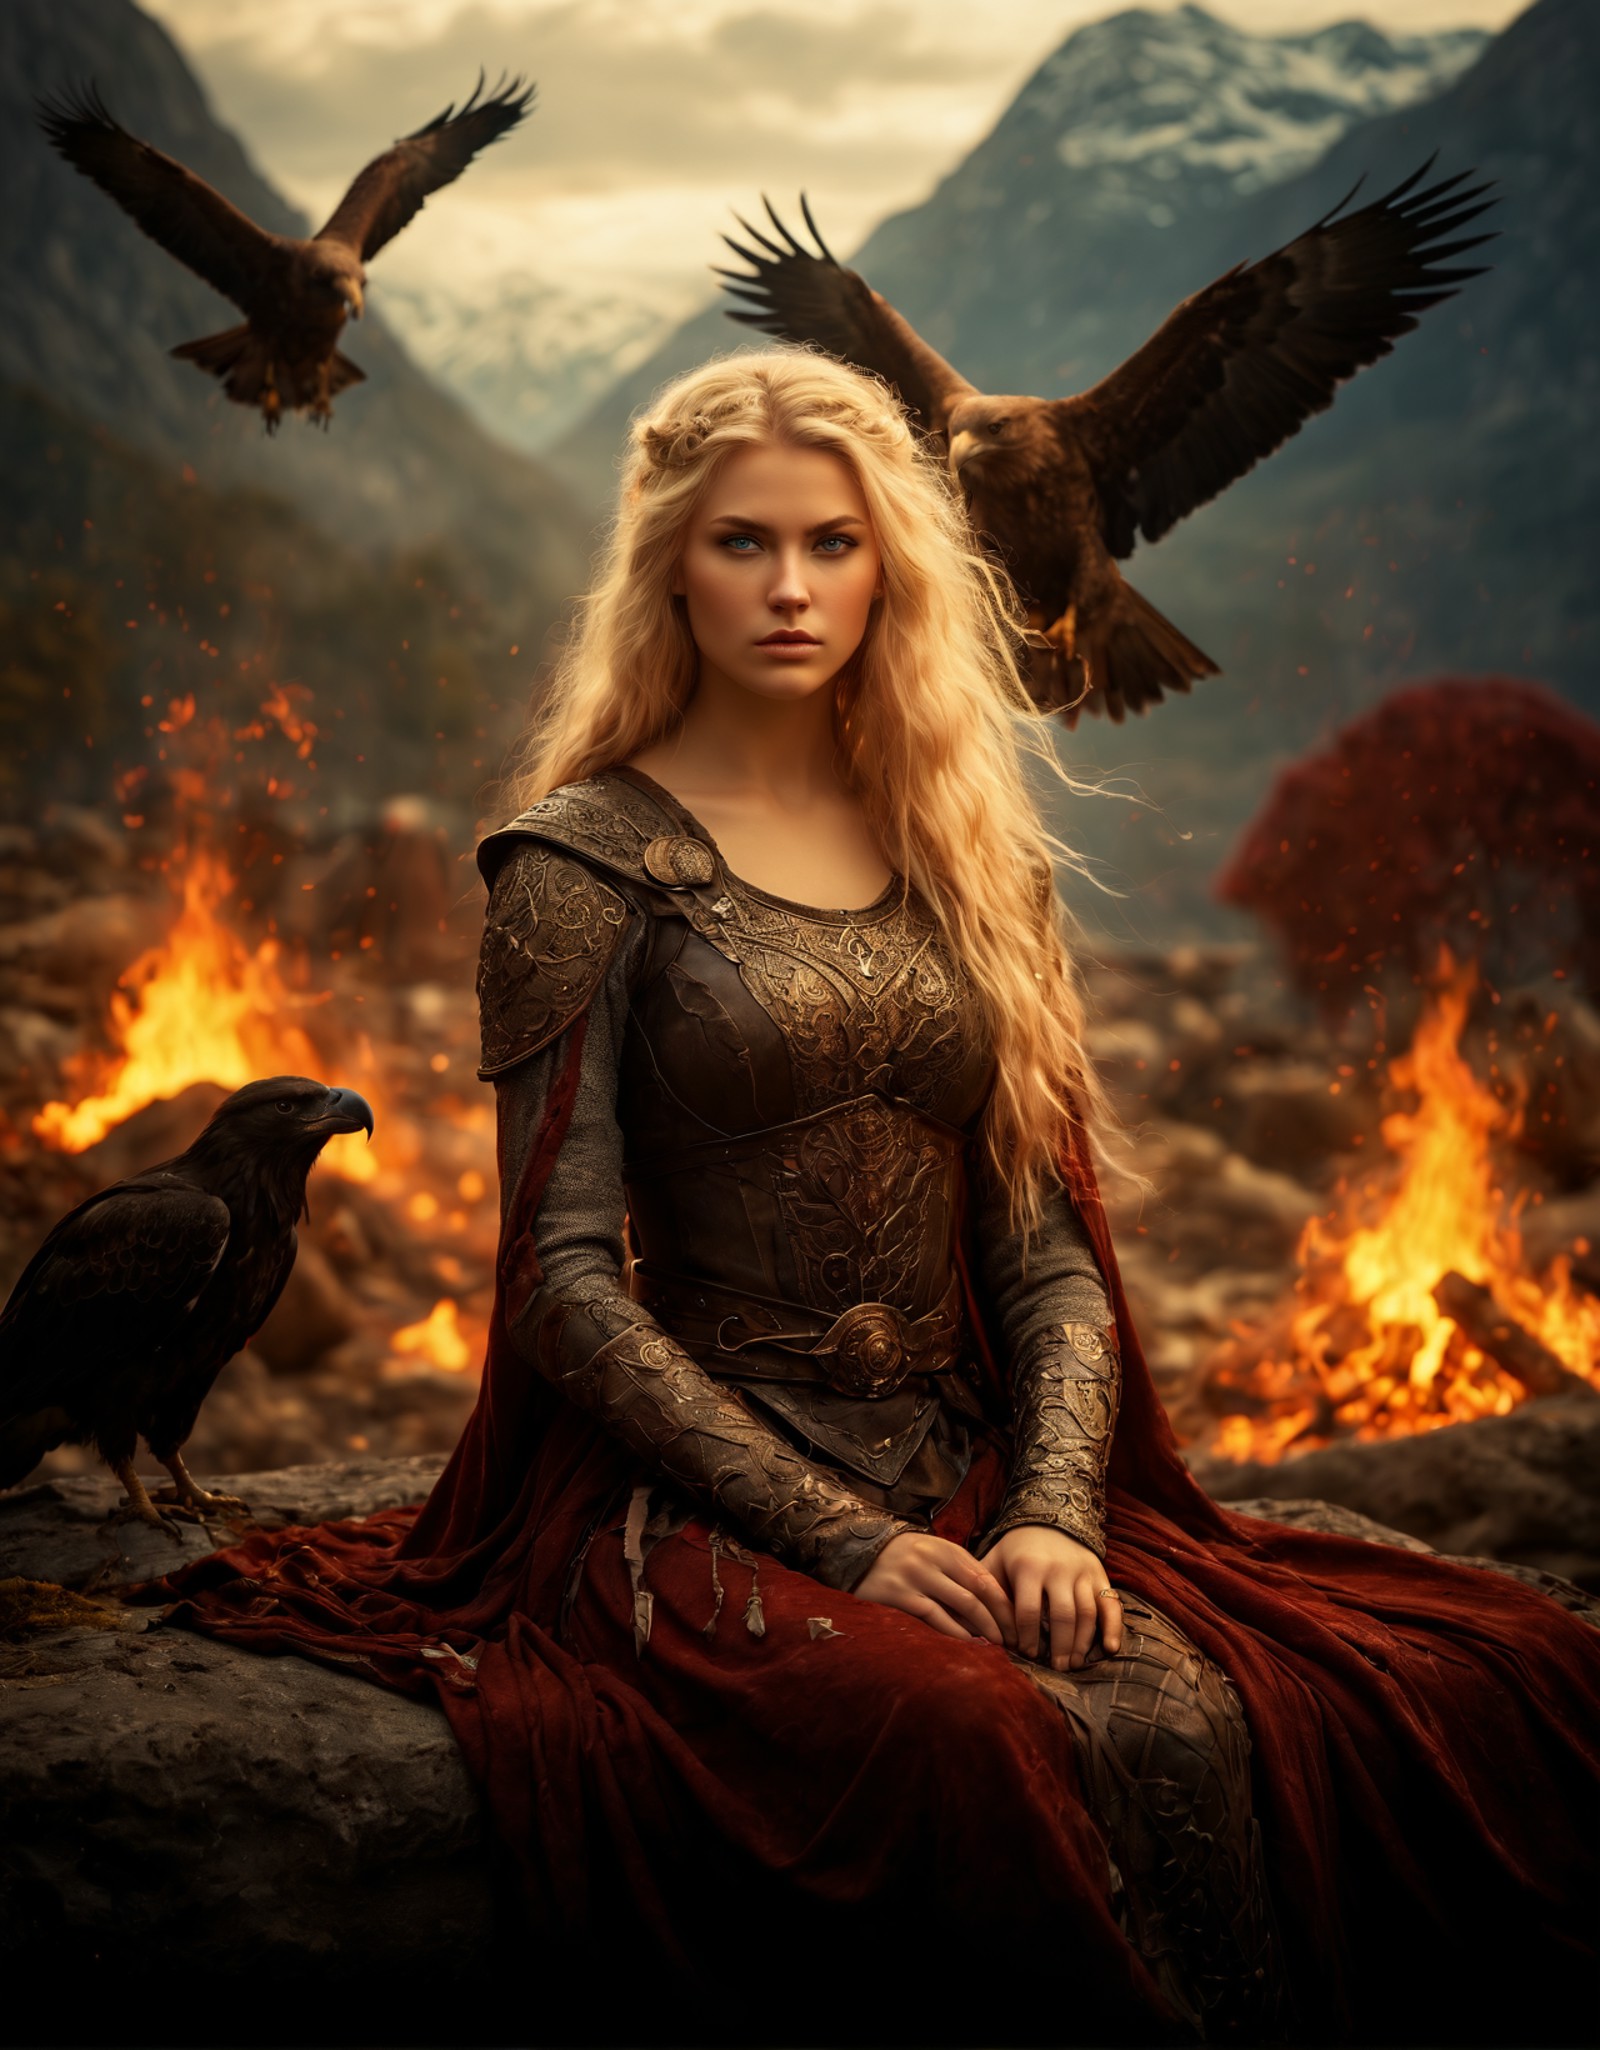 breathtaking, film photography, beautiful viking woman, surrounded by animals and embers, Eagle, Bear, Crows, Wolf, laying...